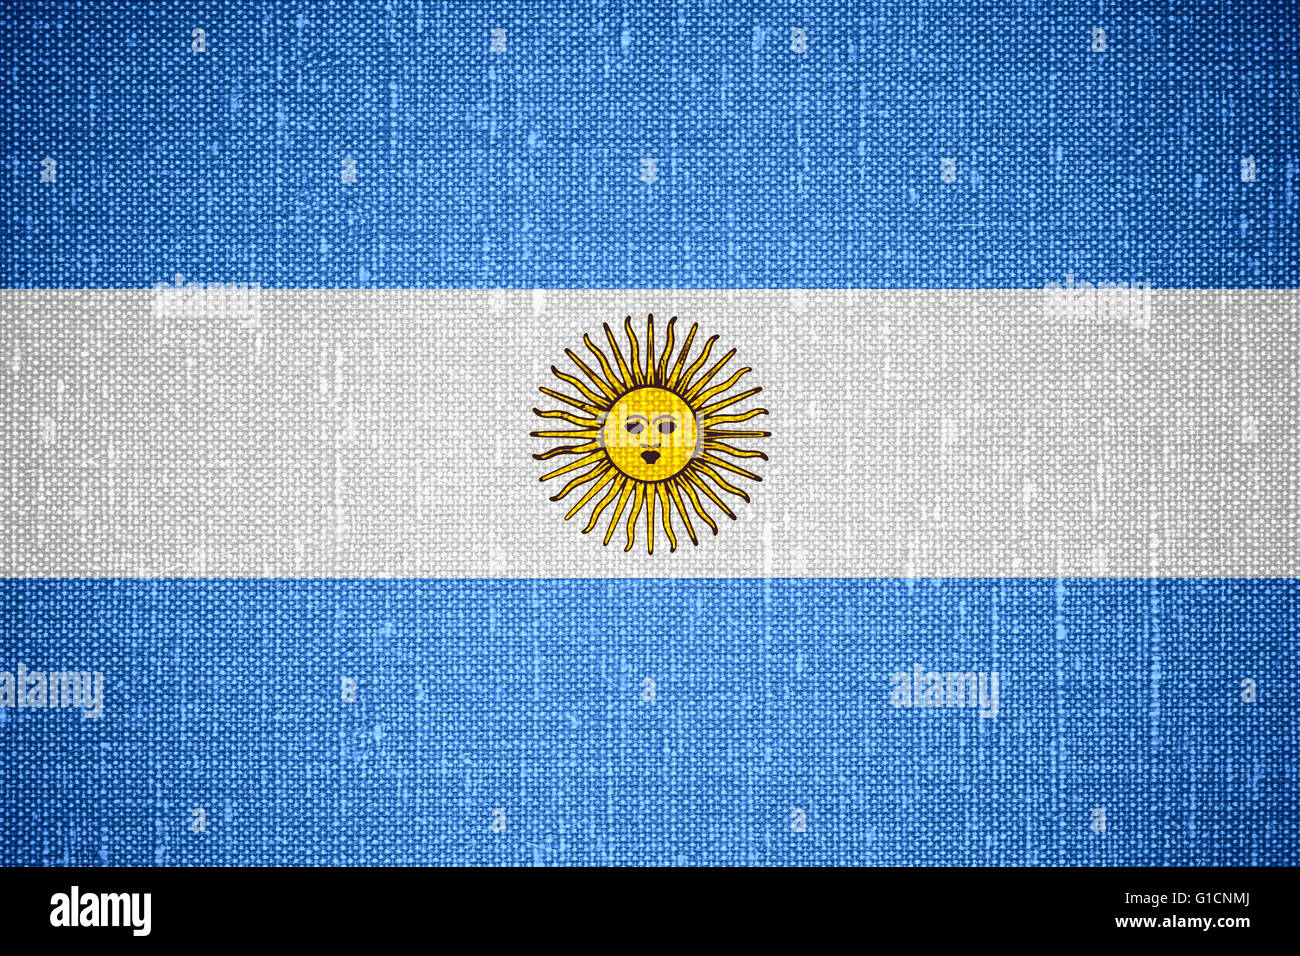 flag of Argentina or Argentinian banner on cnavas background Stock Photo